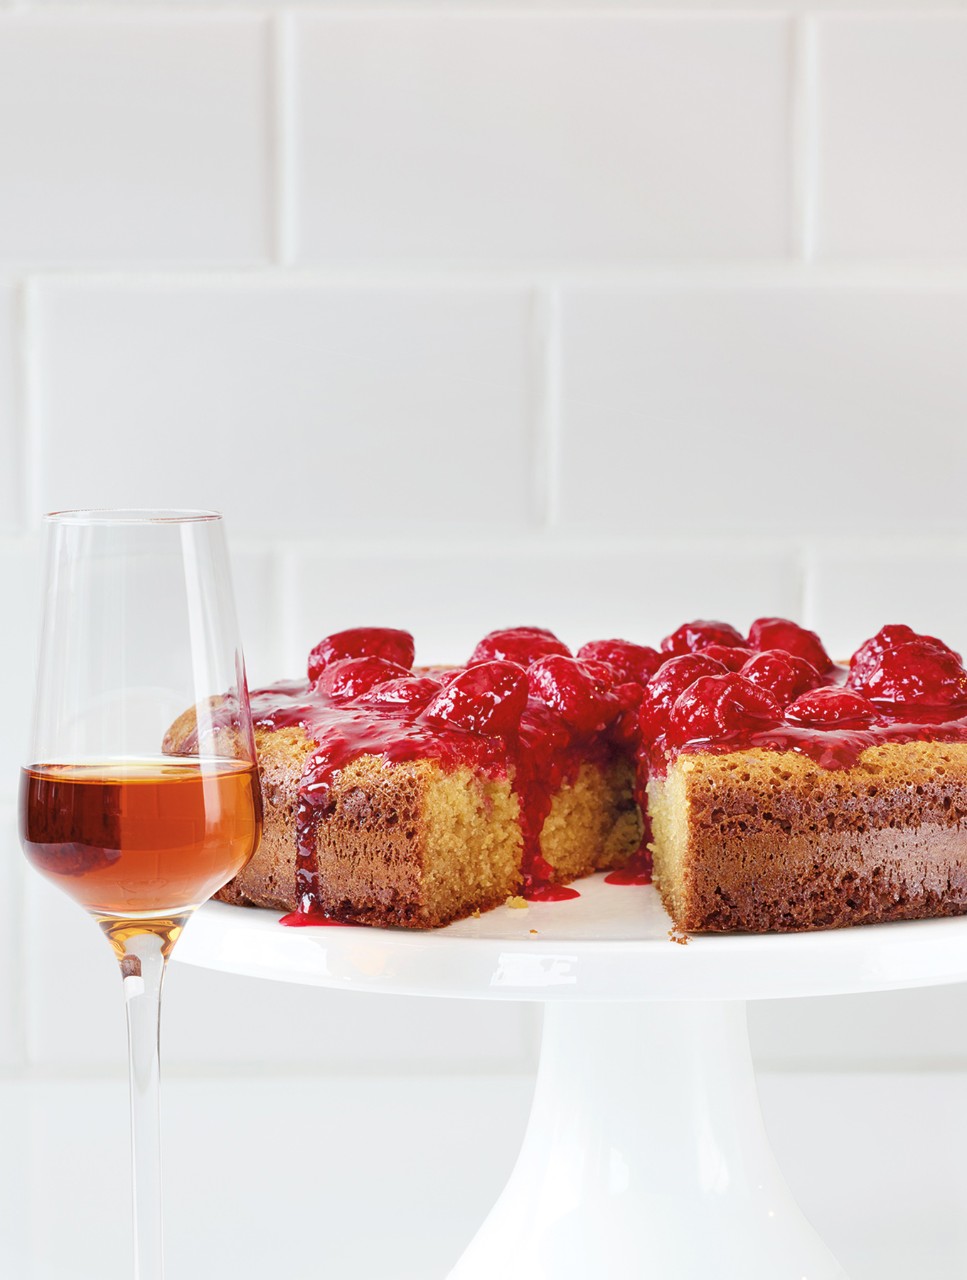 Almond Cake with Raspberry Compote